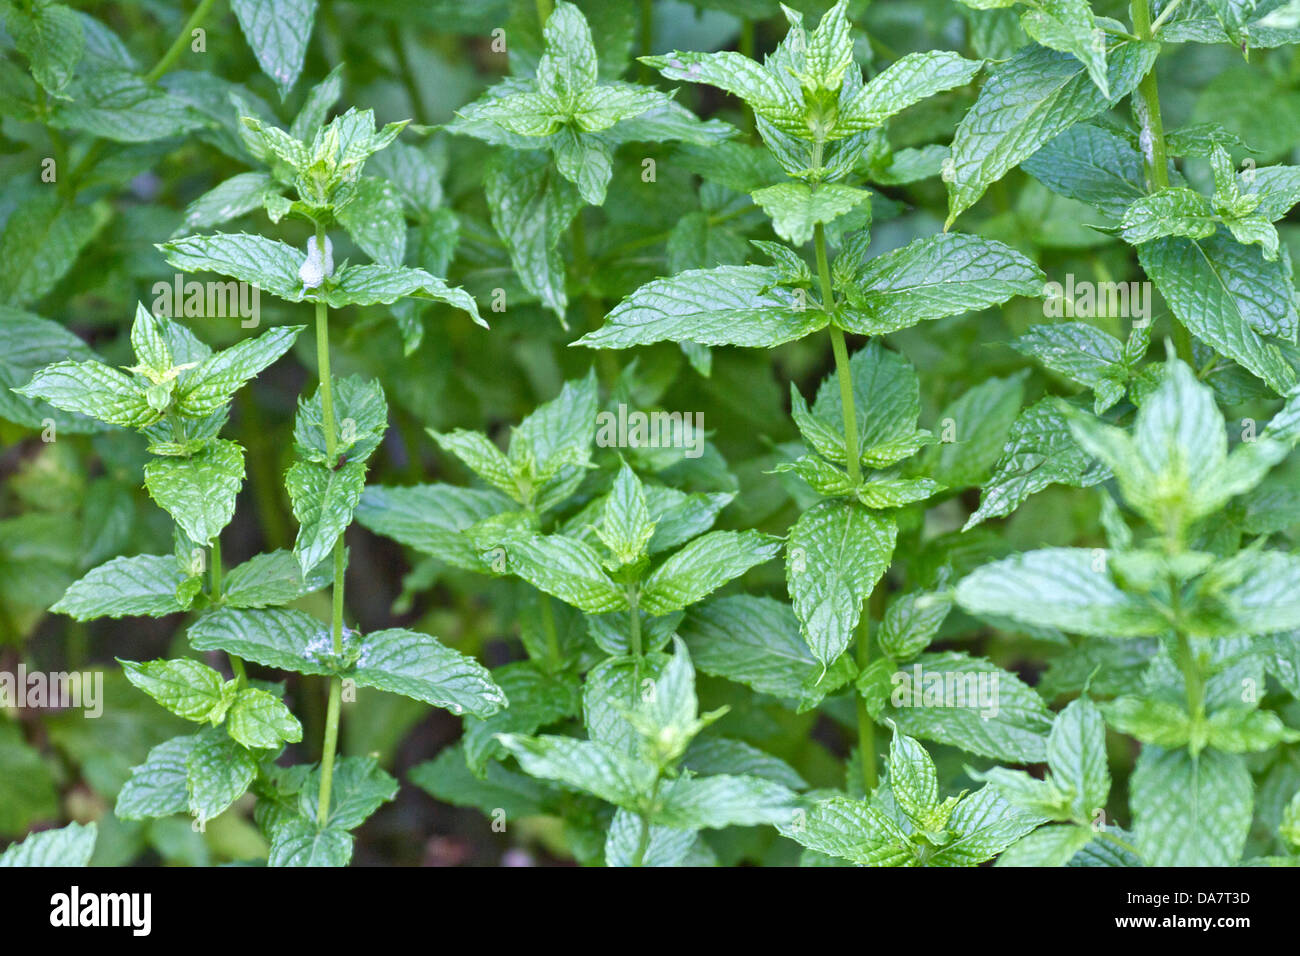 Close up of a patch of thriving spearmint plants Stock Photo